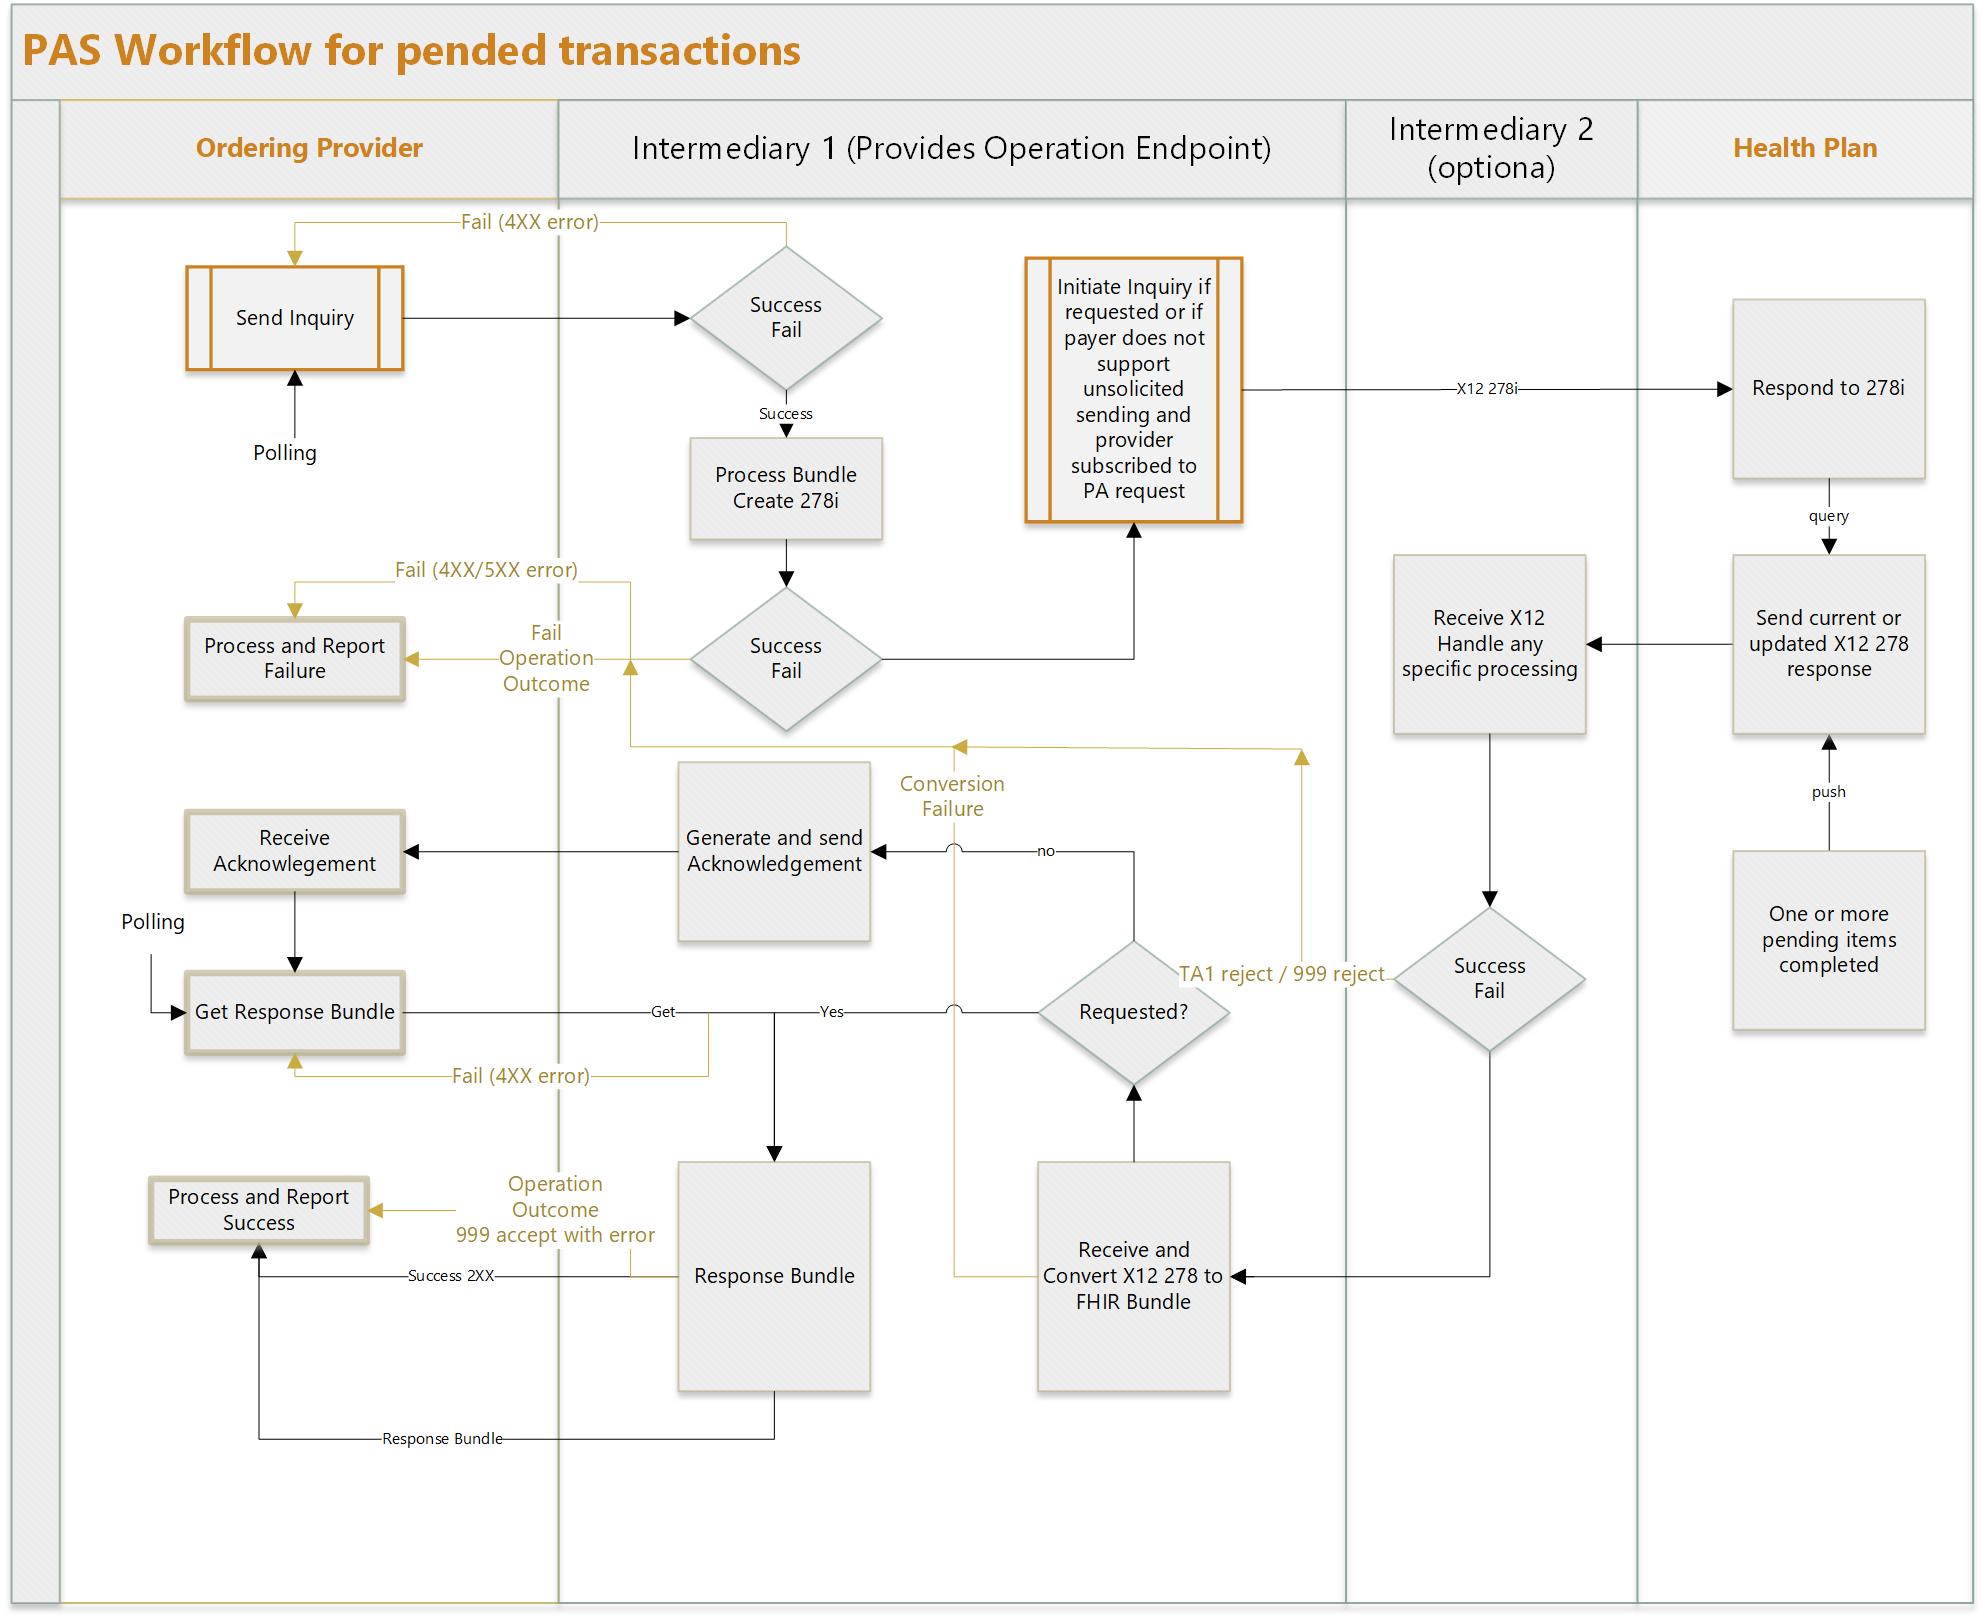 PAS Pended Transactions Workflow